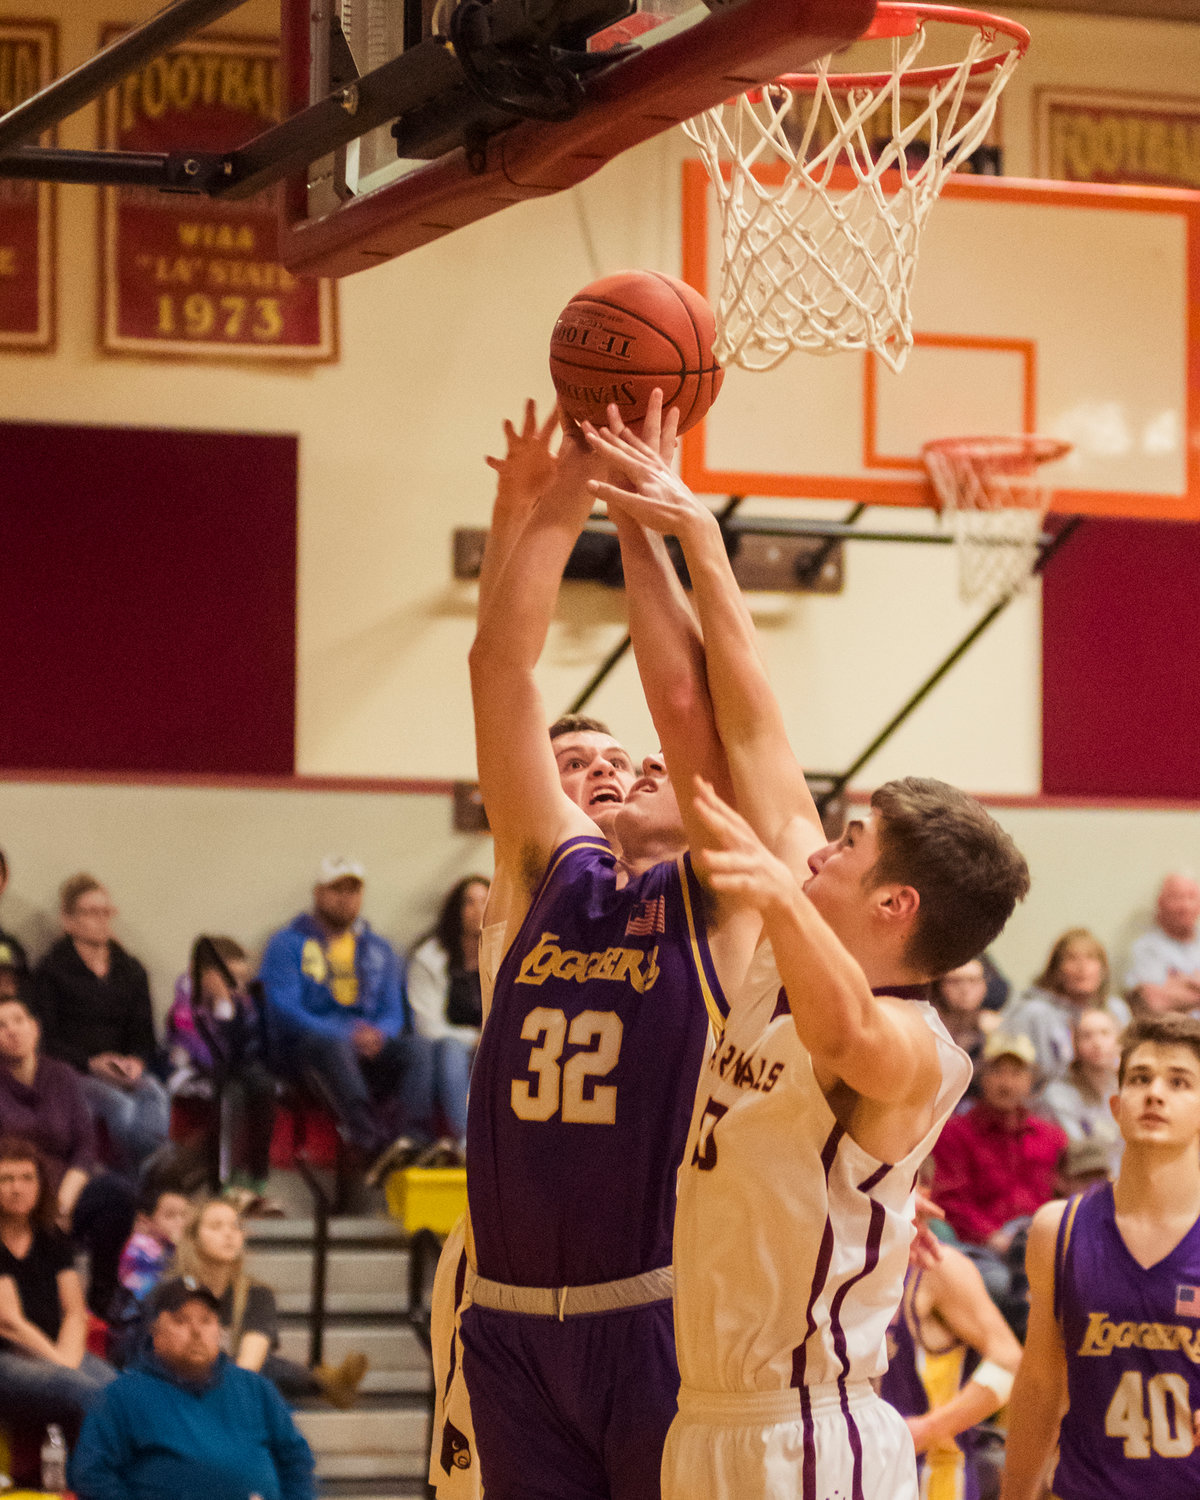 Onalaska's Ashton Haight (32) is surrounded by Cardinal defenders as he goes up for a shot Wednesday night at Winlock High School.